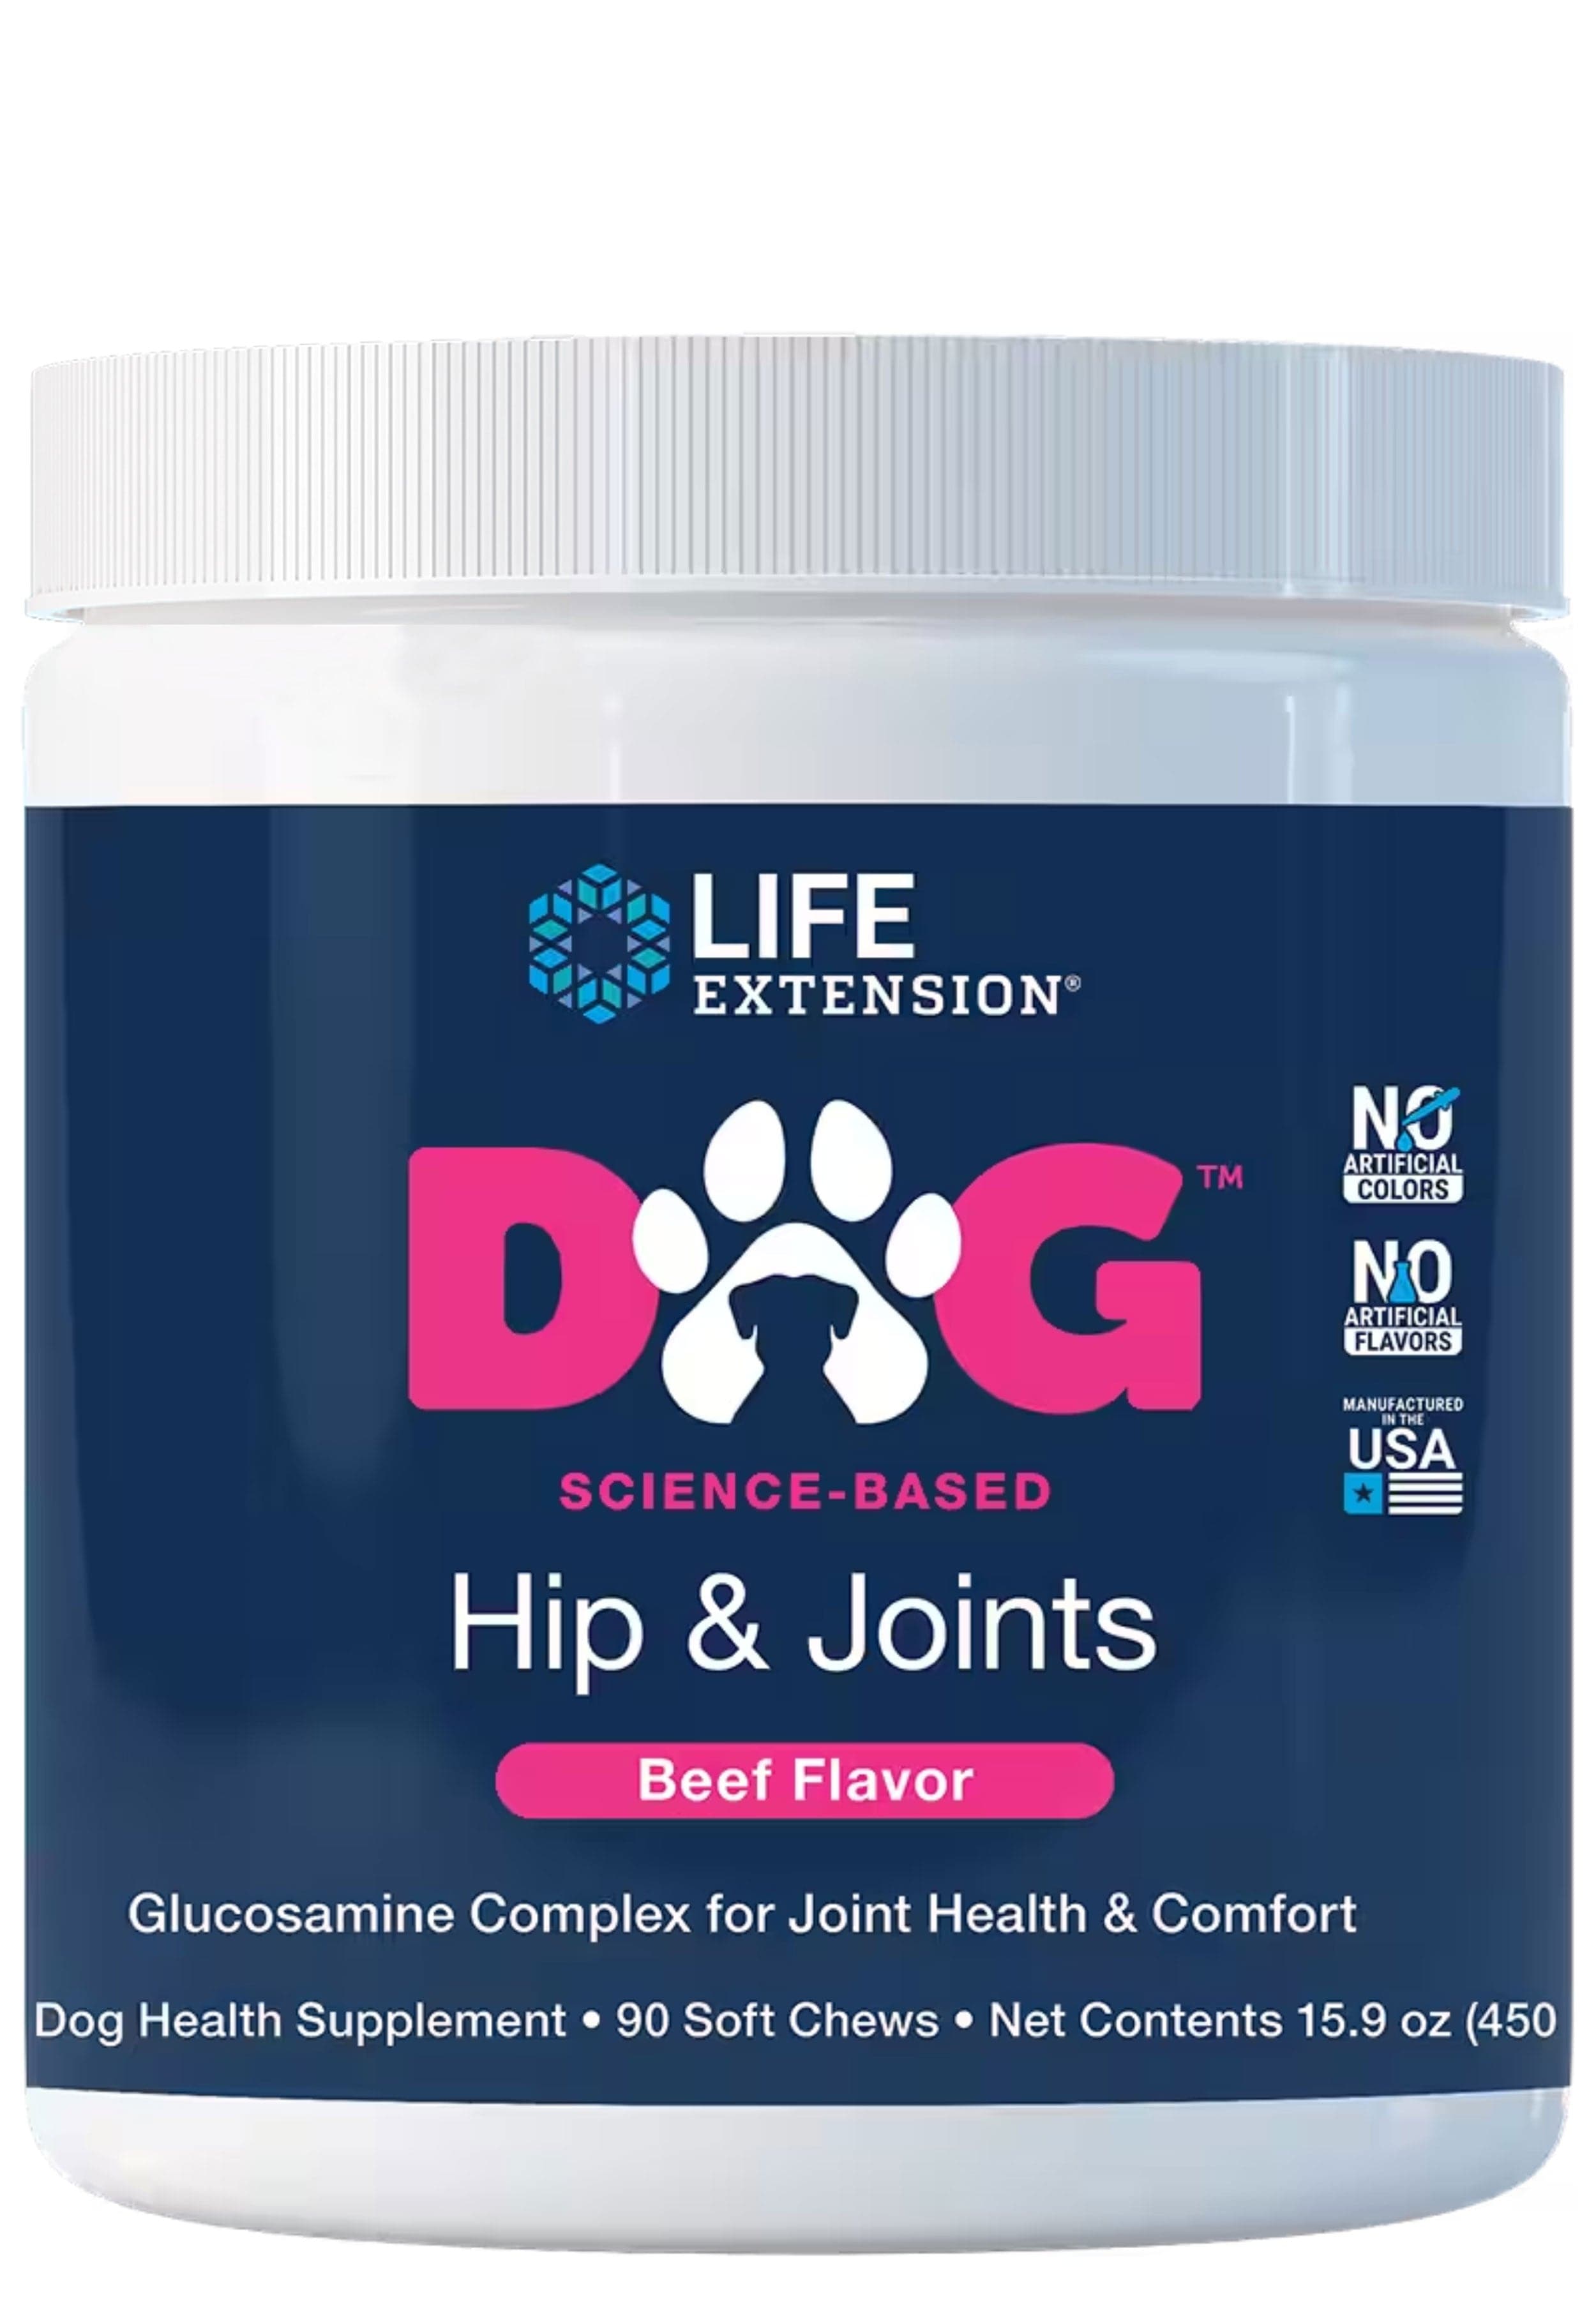 Life Extension DOG Hip & Joints